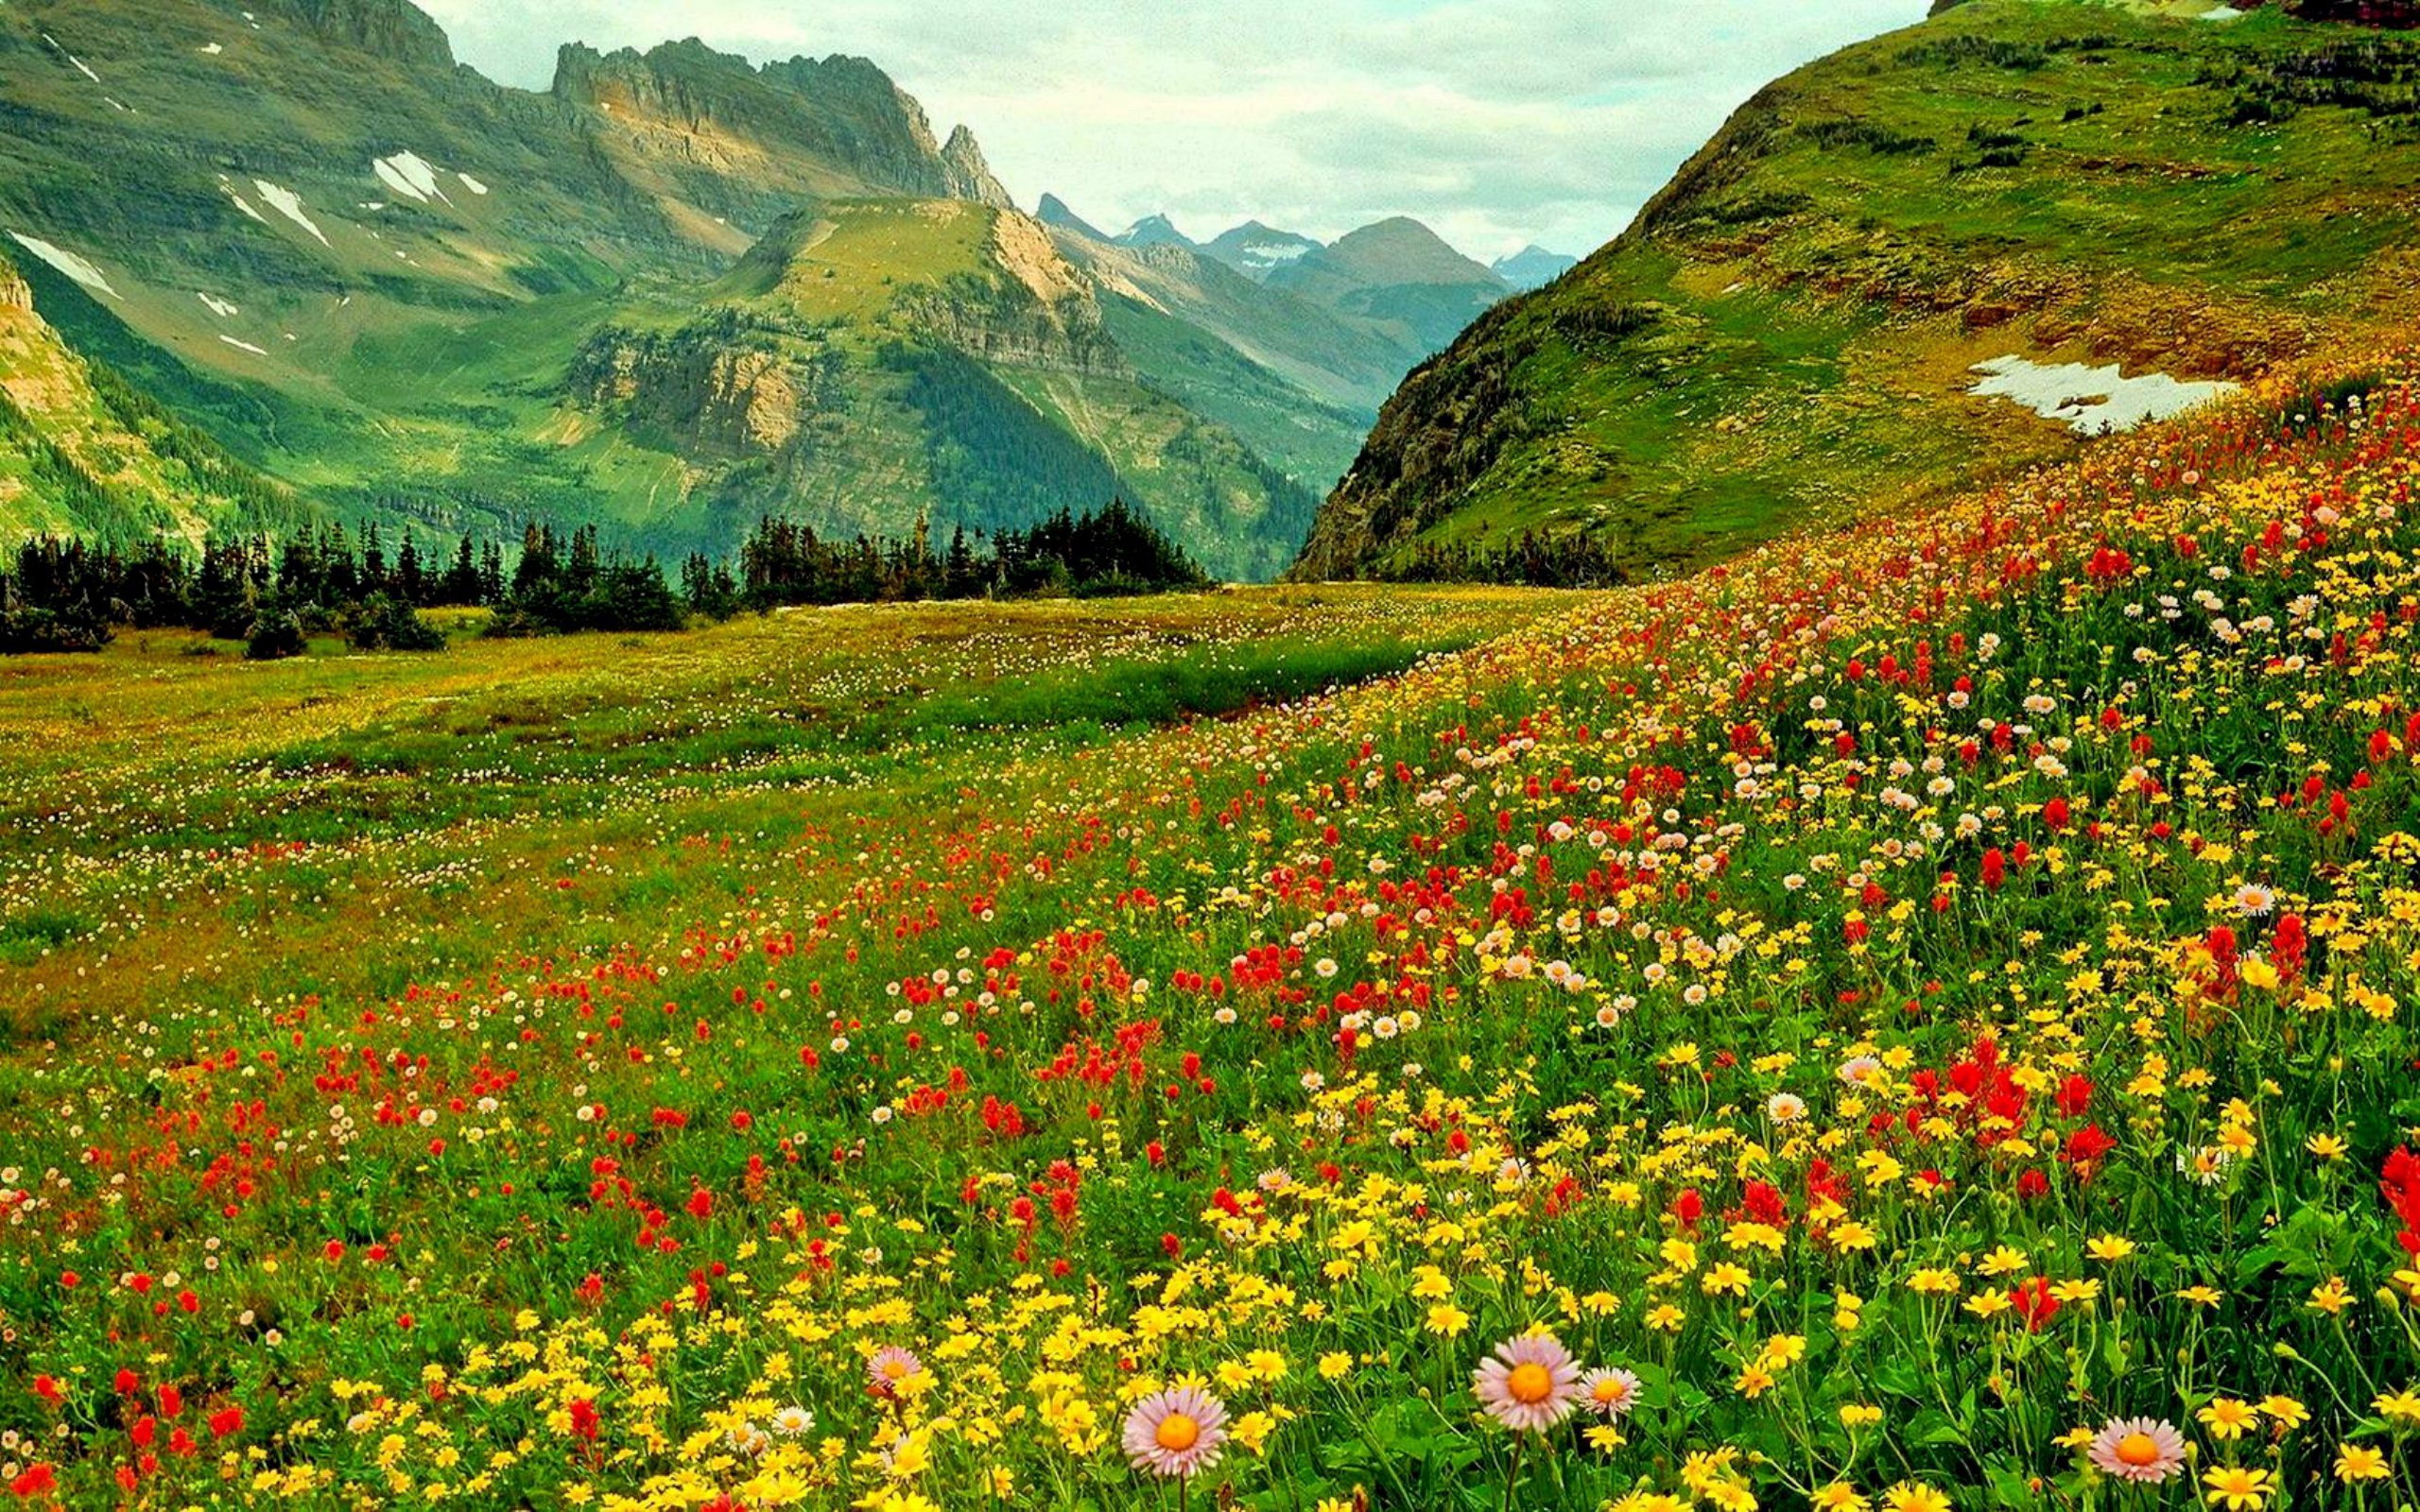 Flower Fields Wallpapers Images Photos Pictures Backgrounds